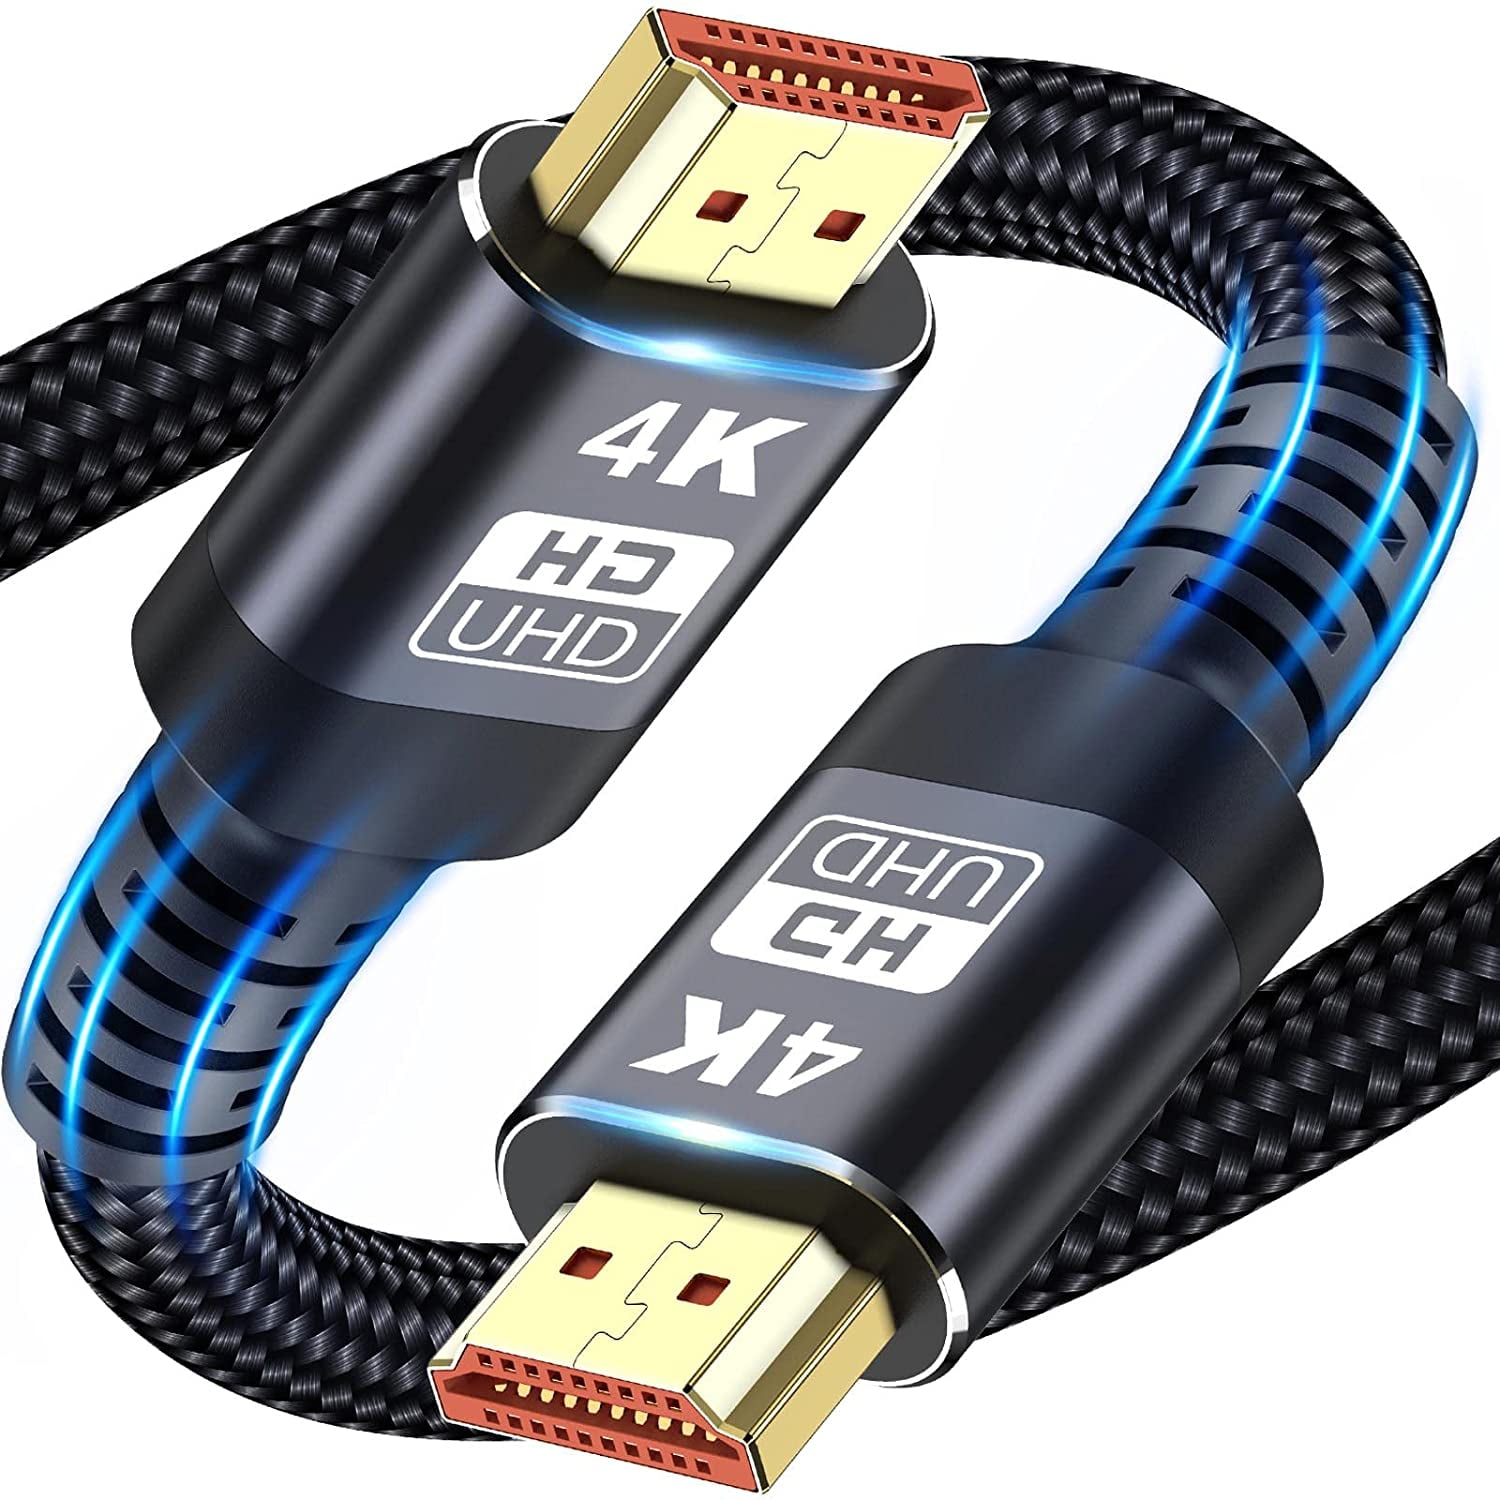 4K HDMI Cable 1.5ft, HDMI 2.0 Cable/Lead, Ultra hdmi to hdmi Cord high  Speed 18gbps, 4K@60Hz, ARC, Gold-Plated for 4K TV/PS4 3D, Ethernet,Video